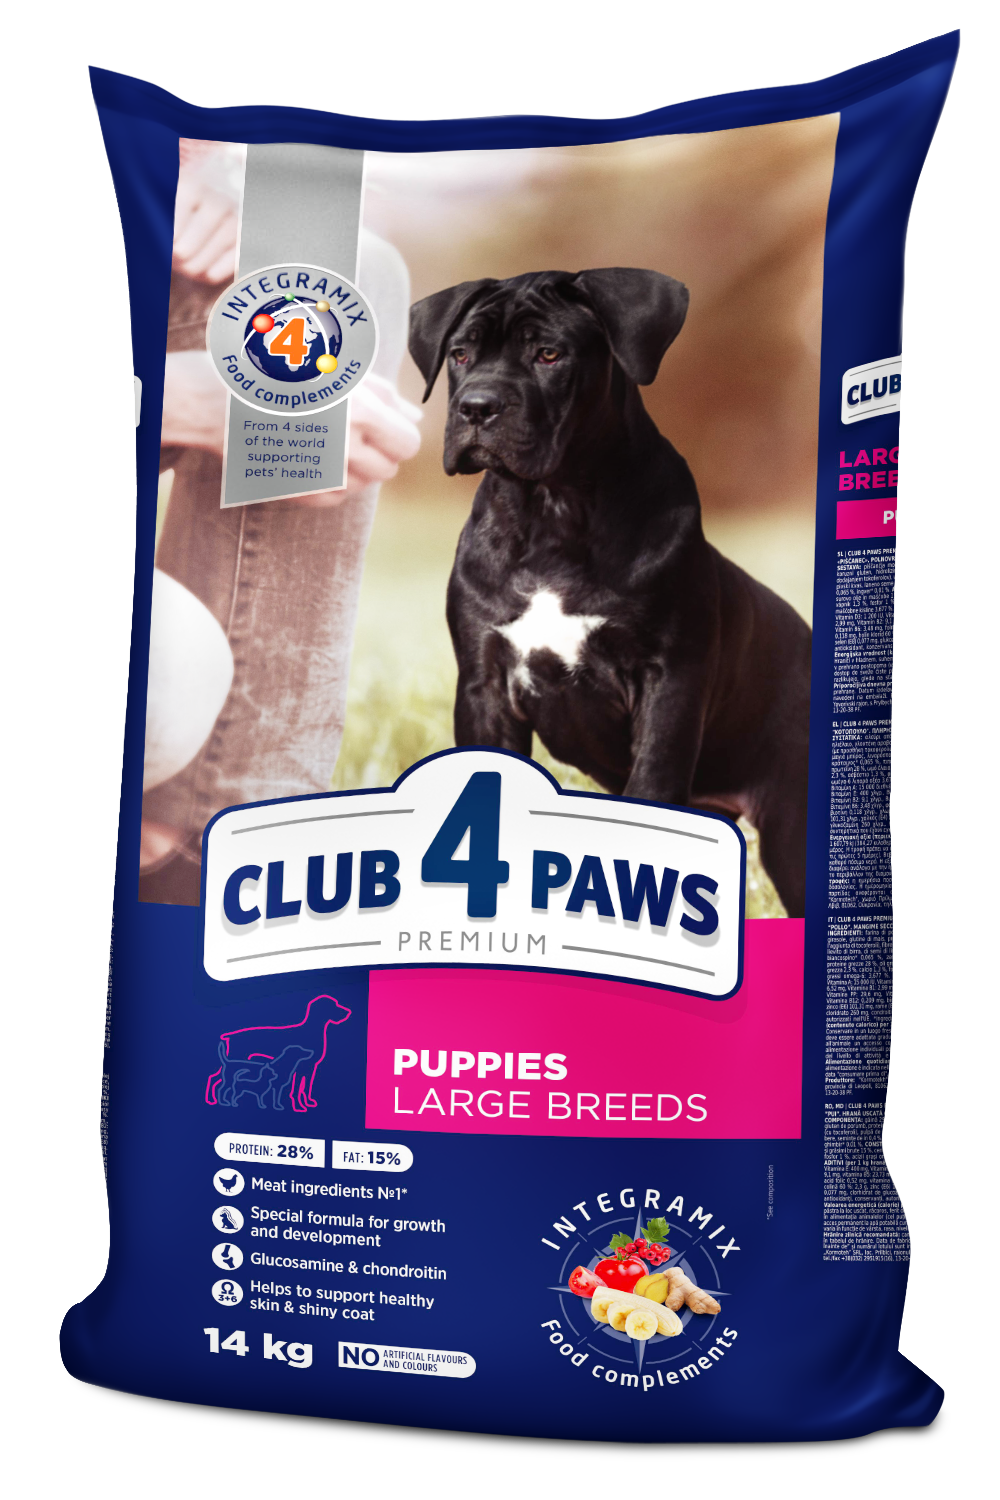 CLUB 4 PAWS Premium For Puppies of Large Breeds, Chicken